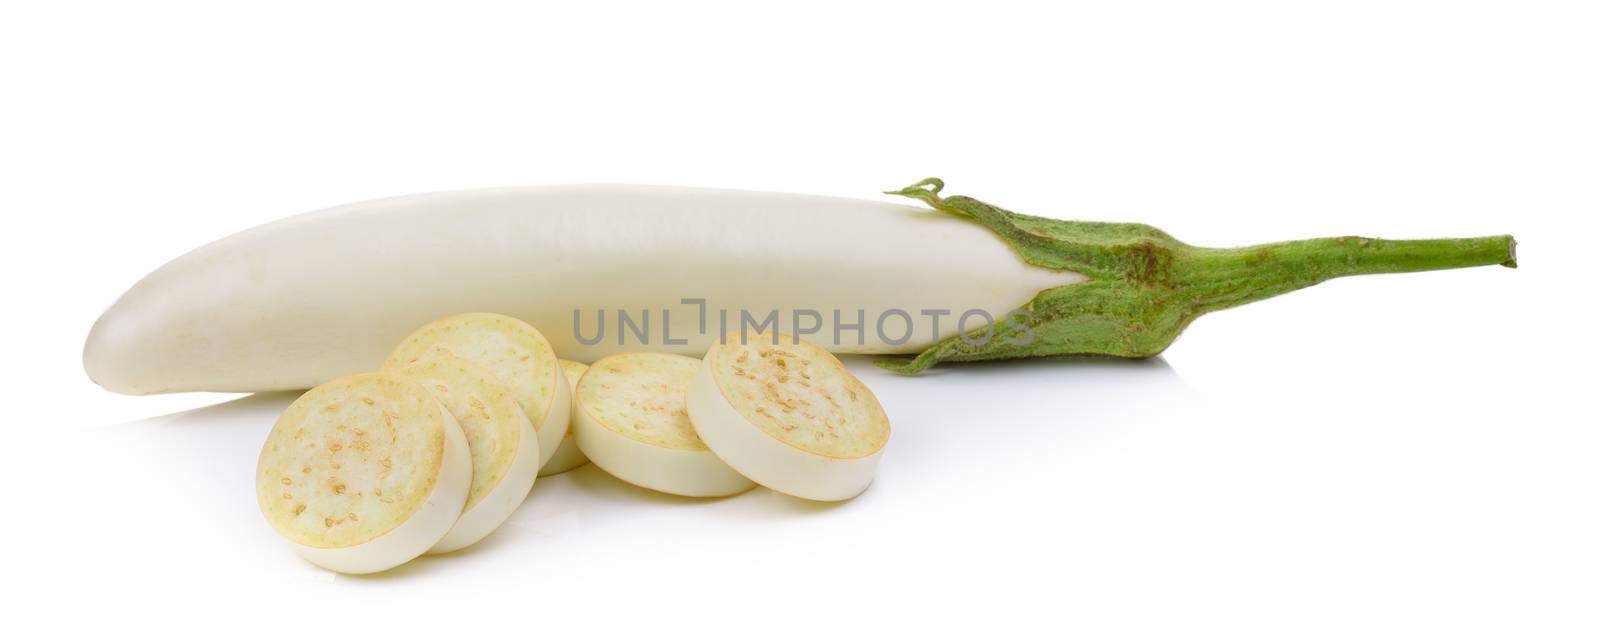 White eggplant on a over white background